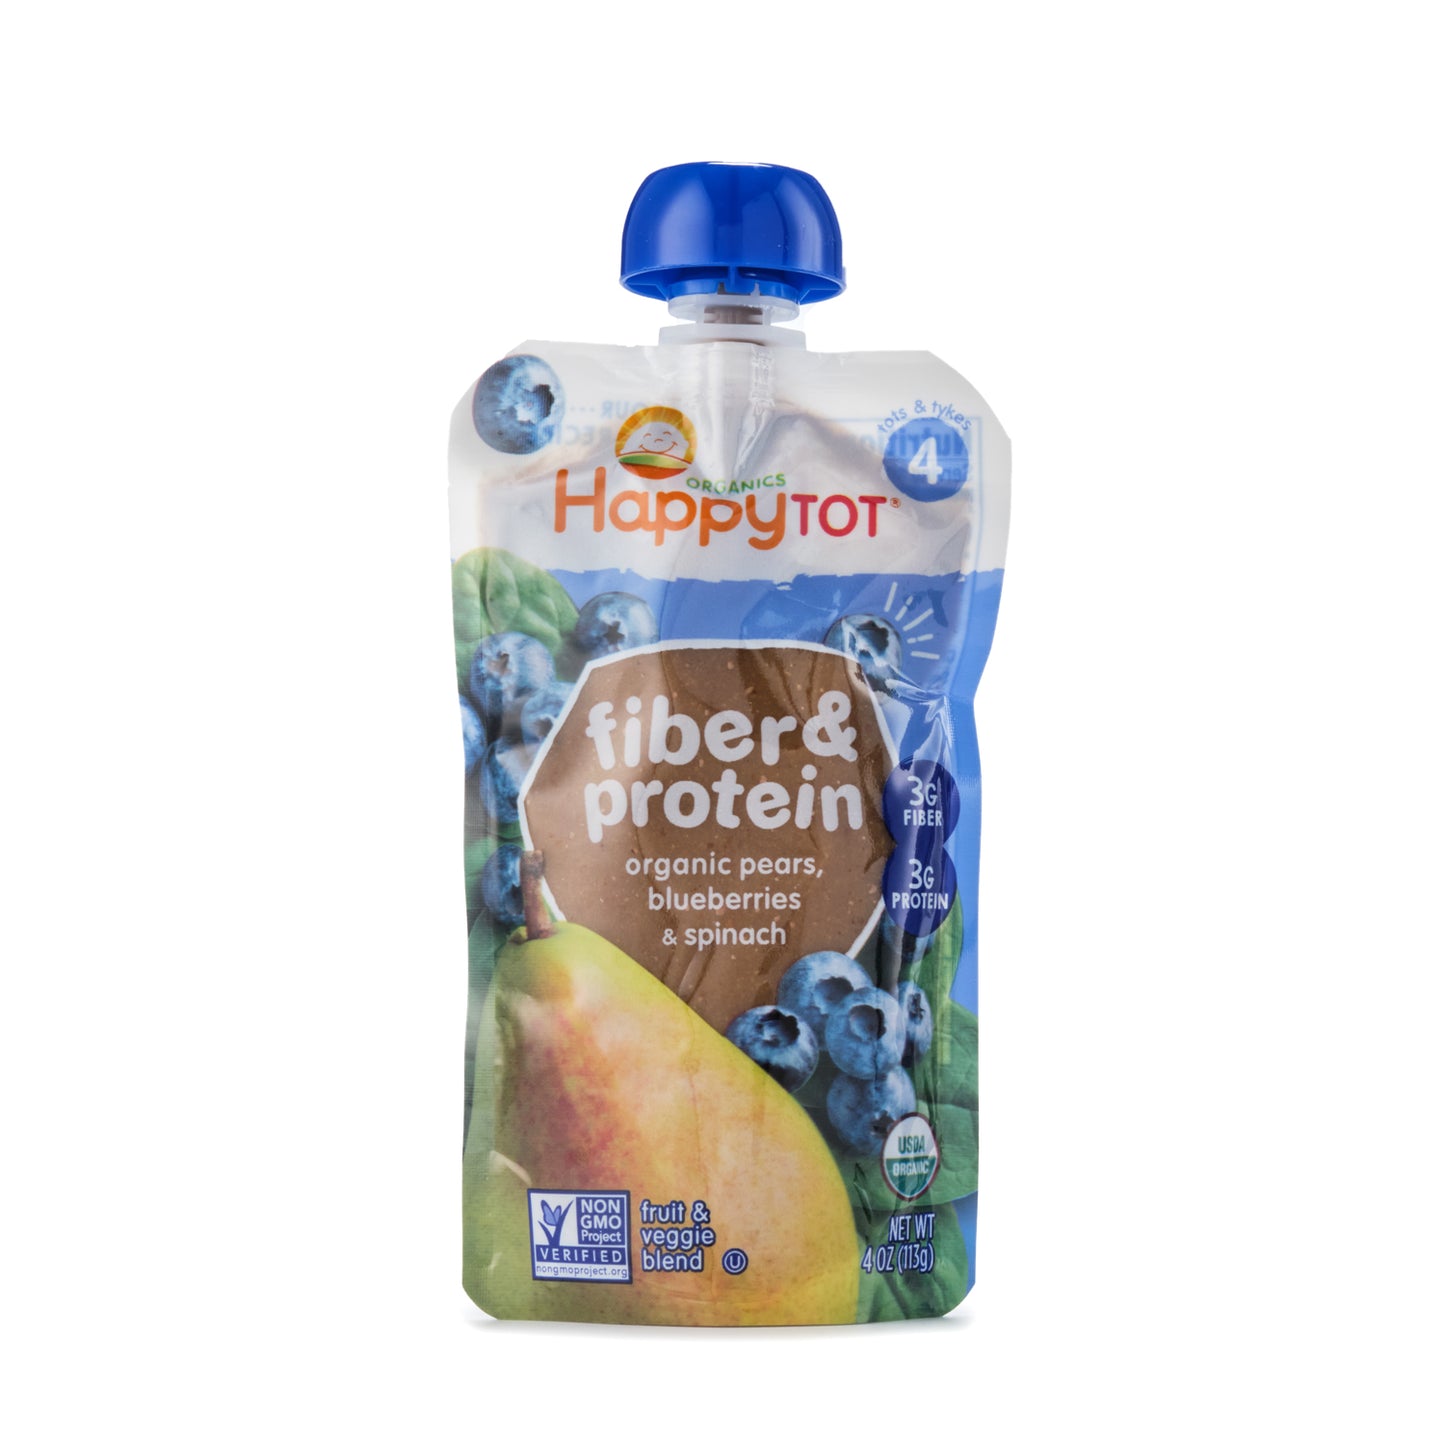 Happy Tot Fiber & Protein Organic Pears, Blueberries & Spinach Stage 4 113g